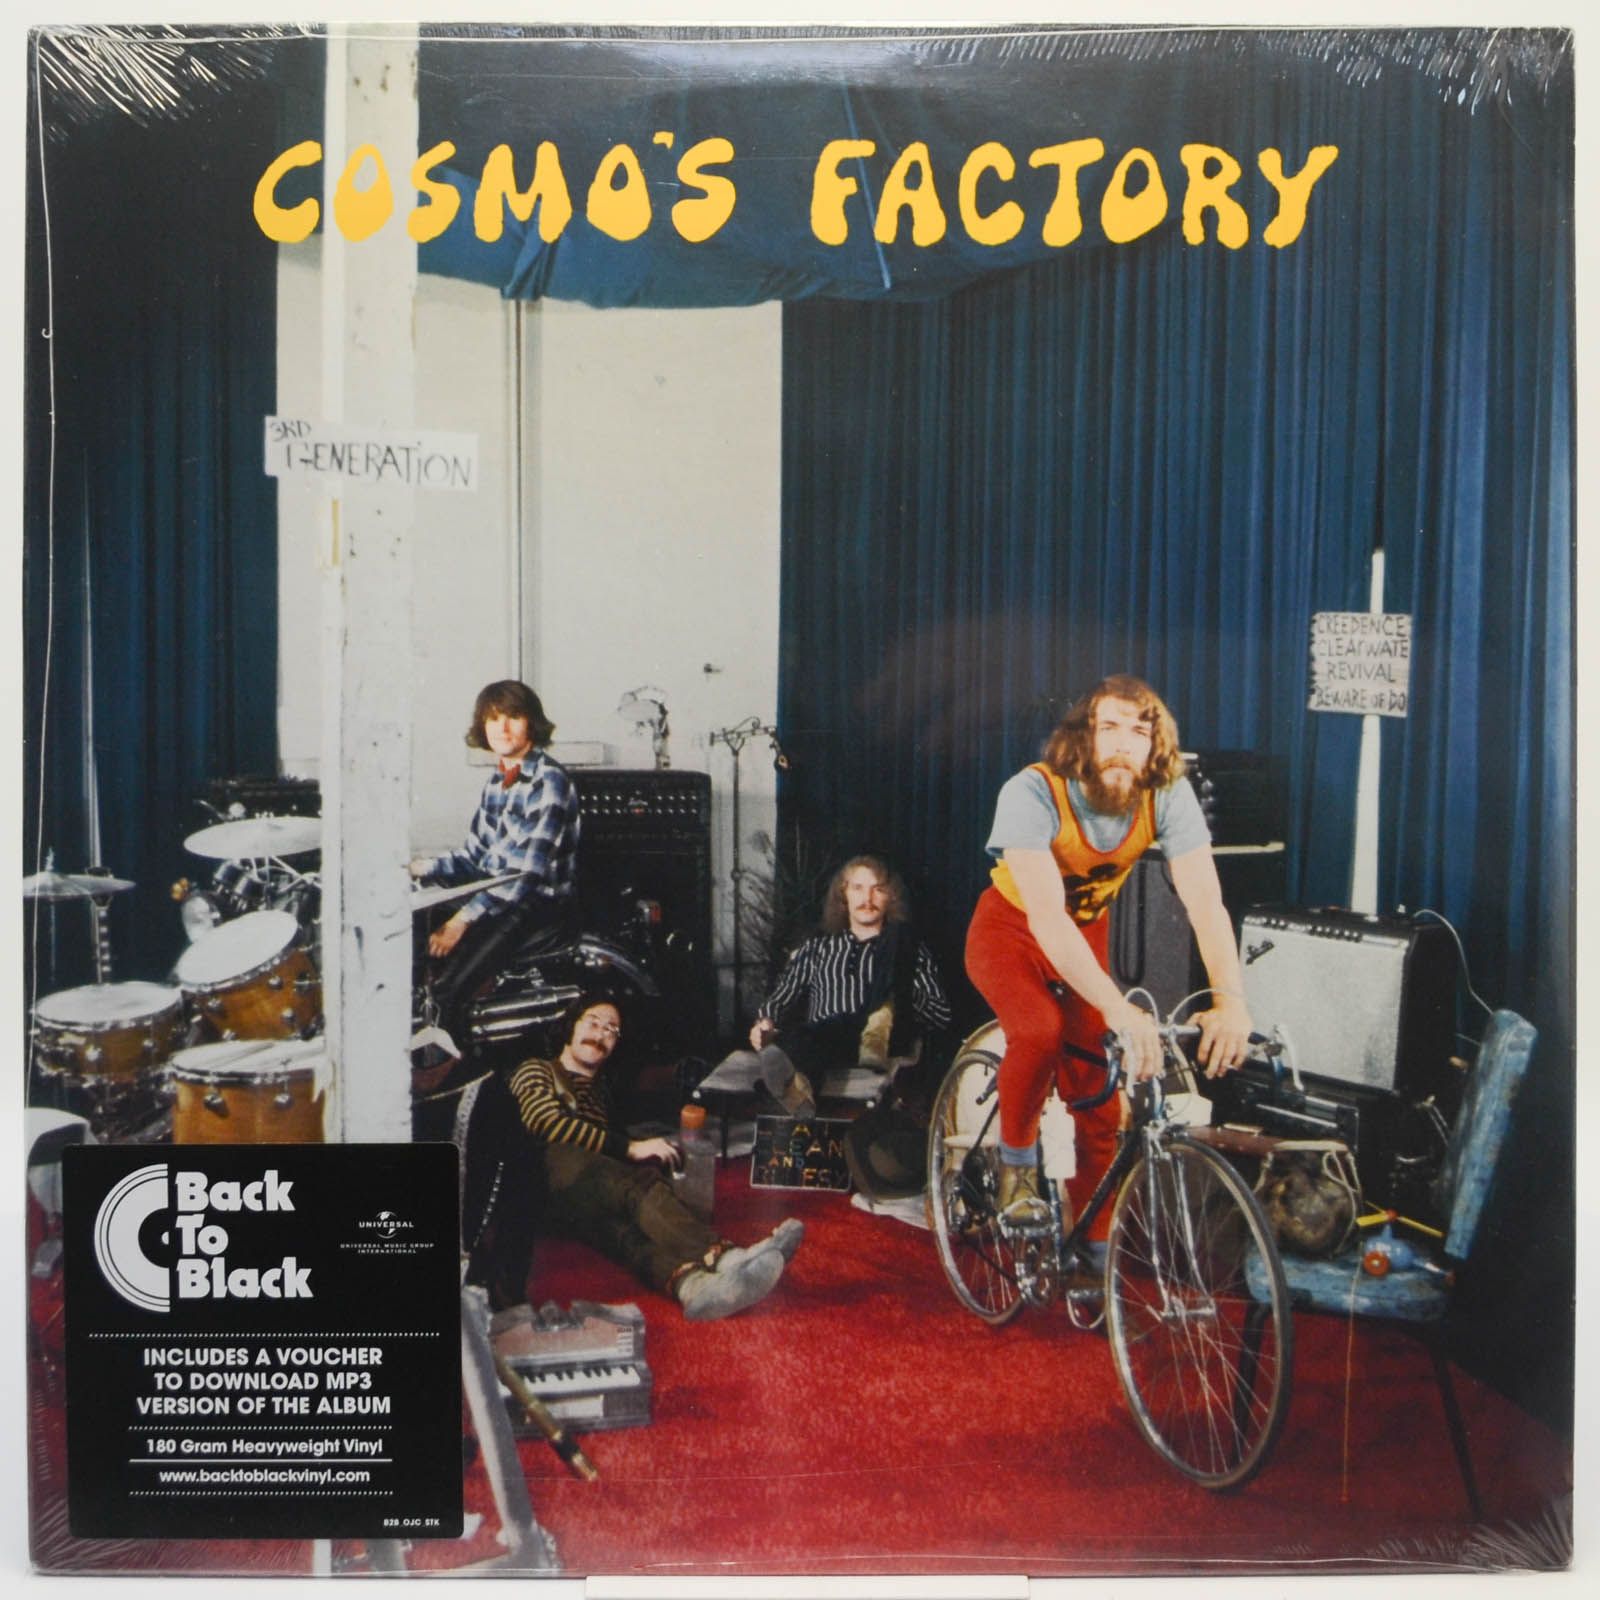 Энд гоу слушать. Creedence Clearwater Revival Cosmo's Factory. Creedence Clearwater Revival photo.